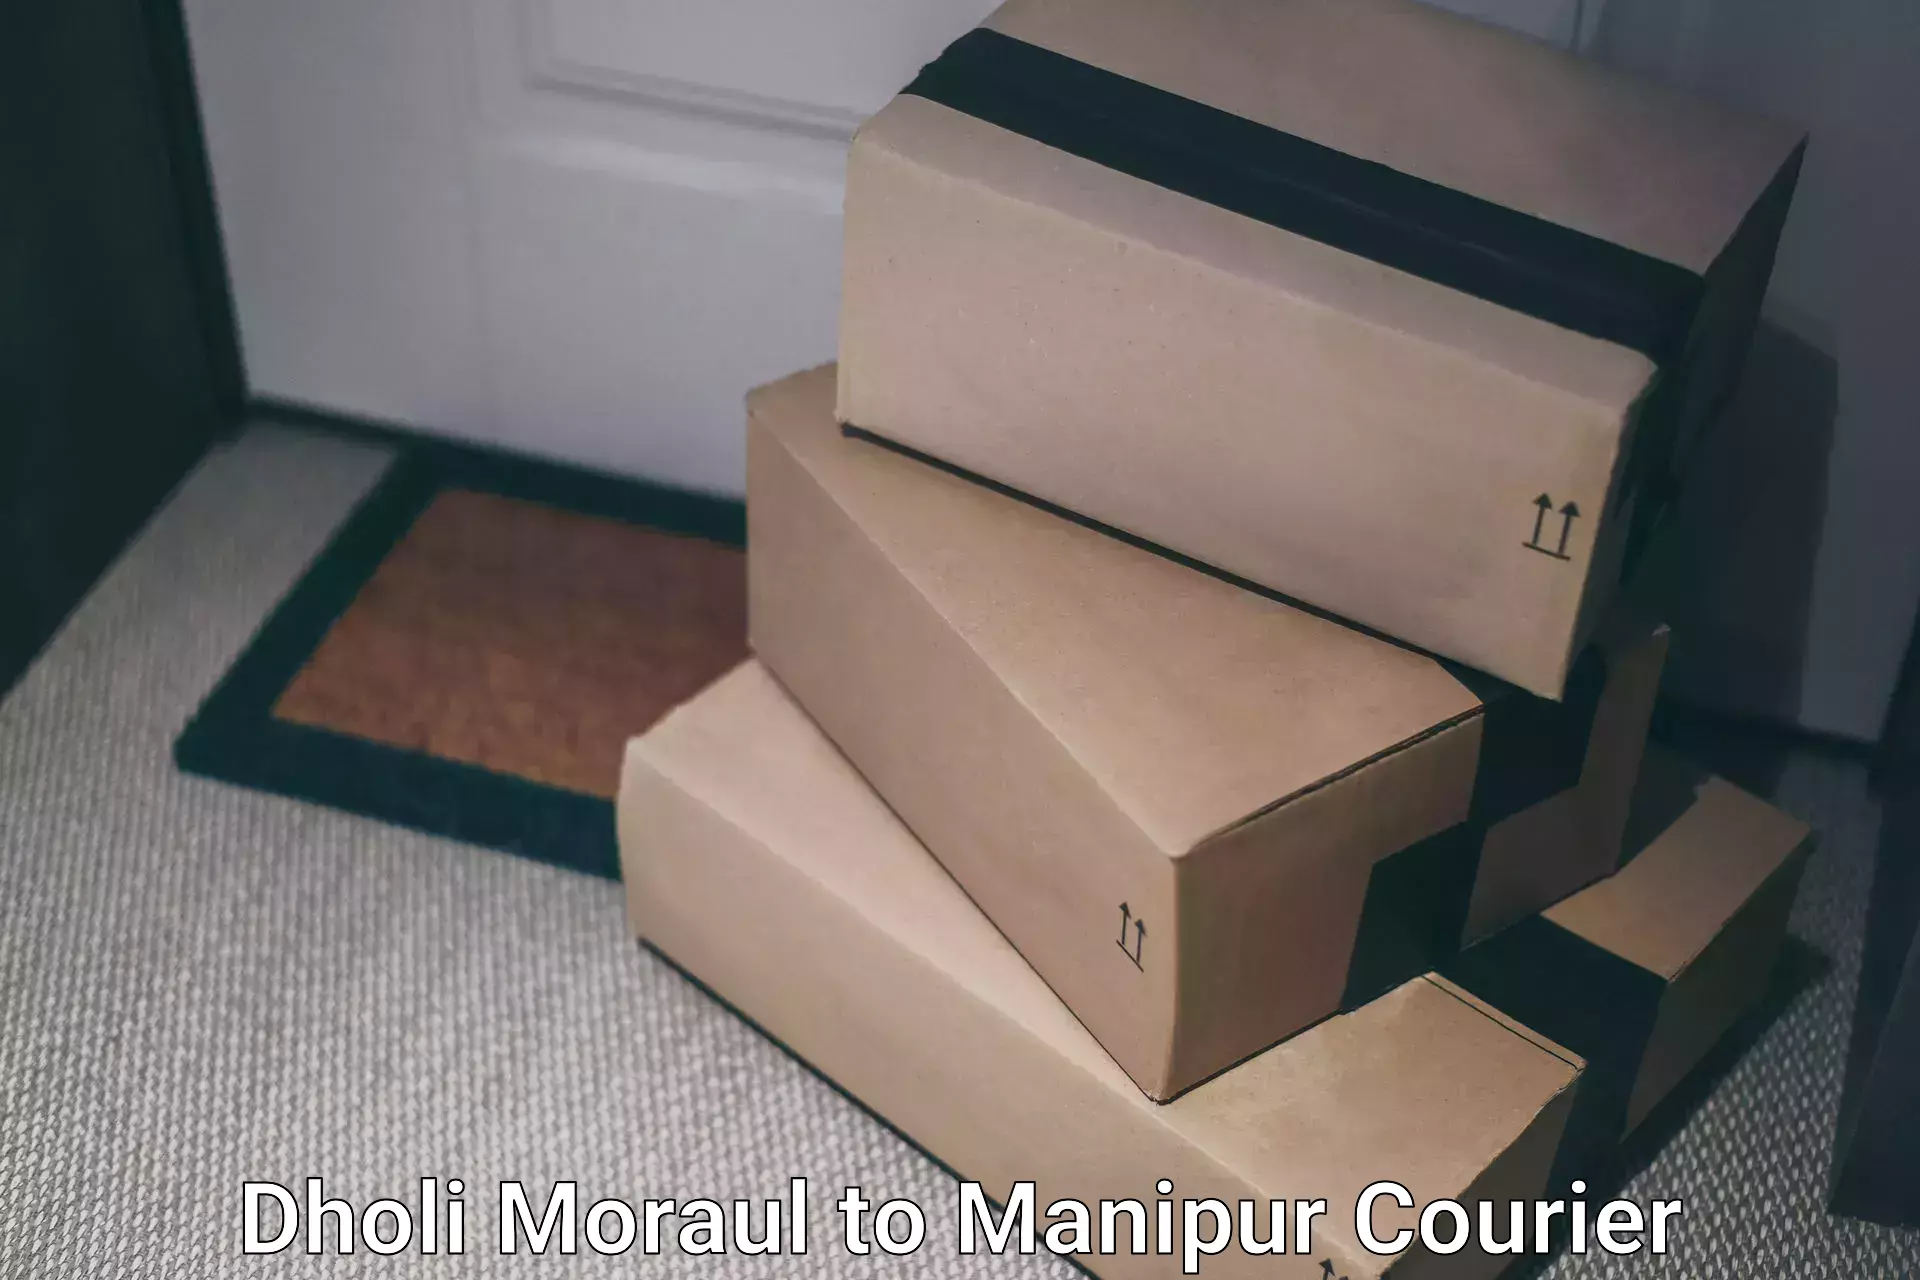 Easy access courier services Dholi Moraul to Chandel